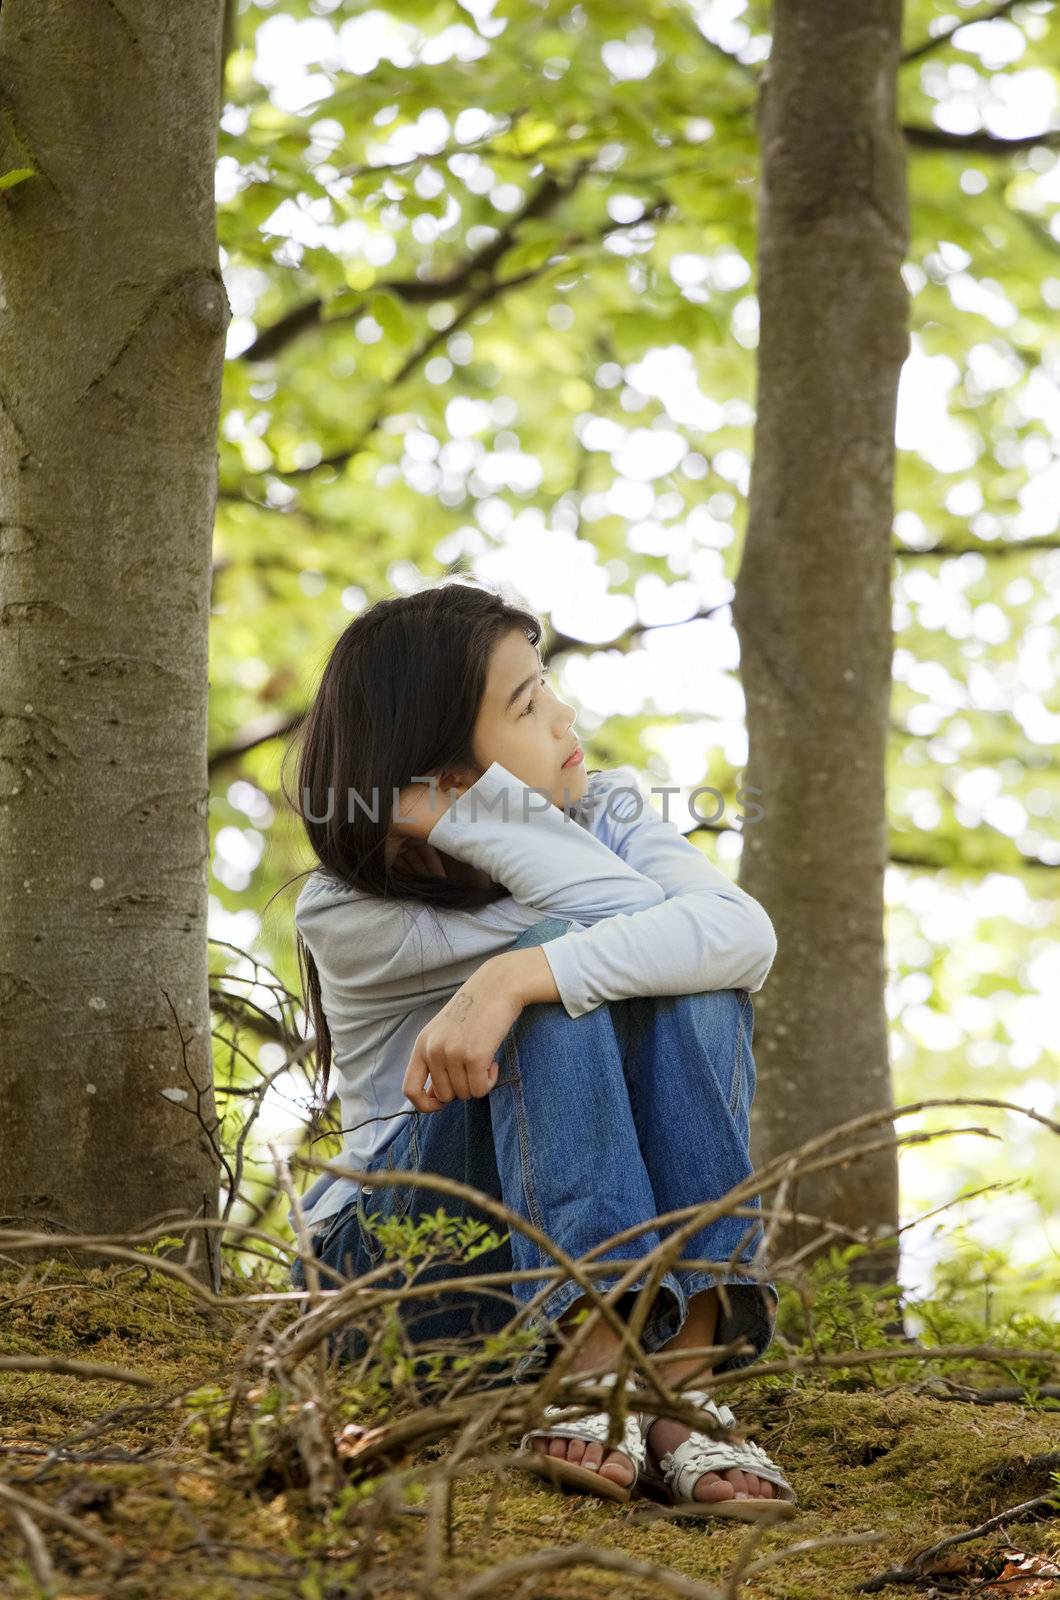 Ten year old girl sitting quietly in woods, looking around thinking